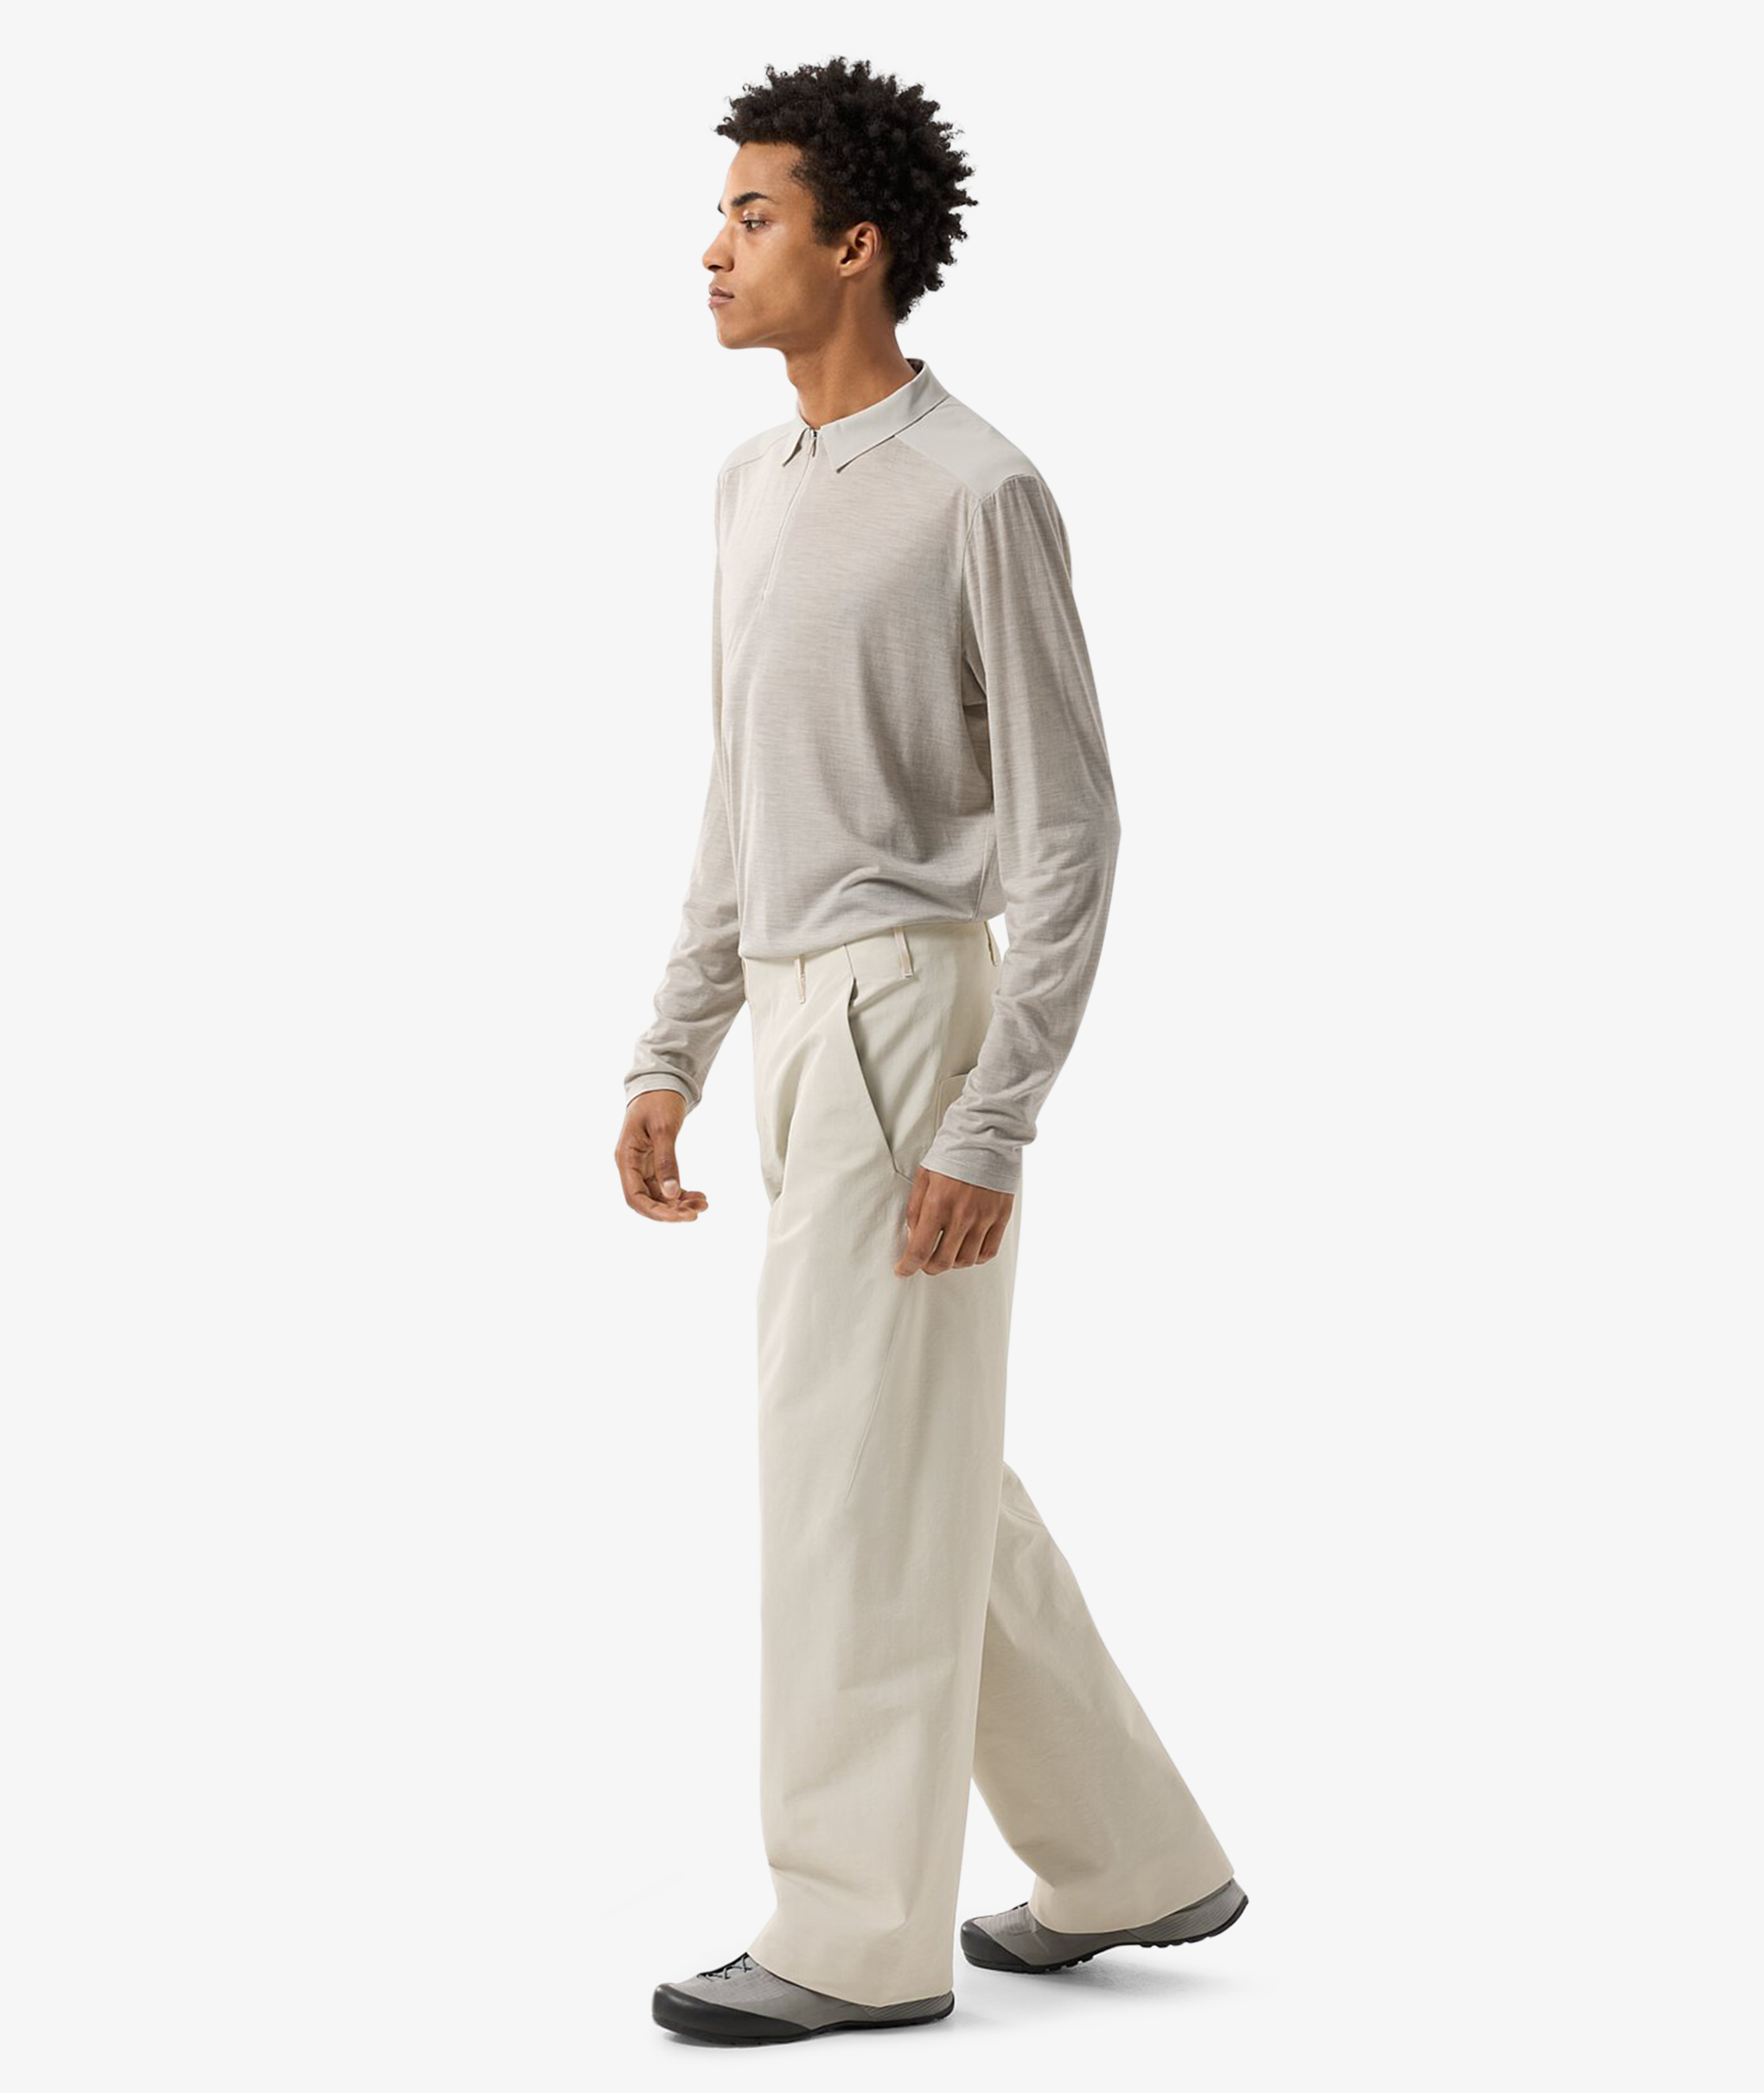 Norse Store | Shipping Worldwide - Veilance CORBEL PANT - Dark Cocoon